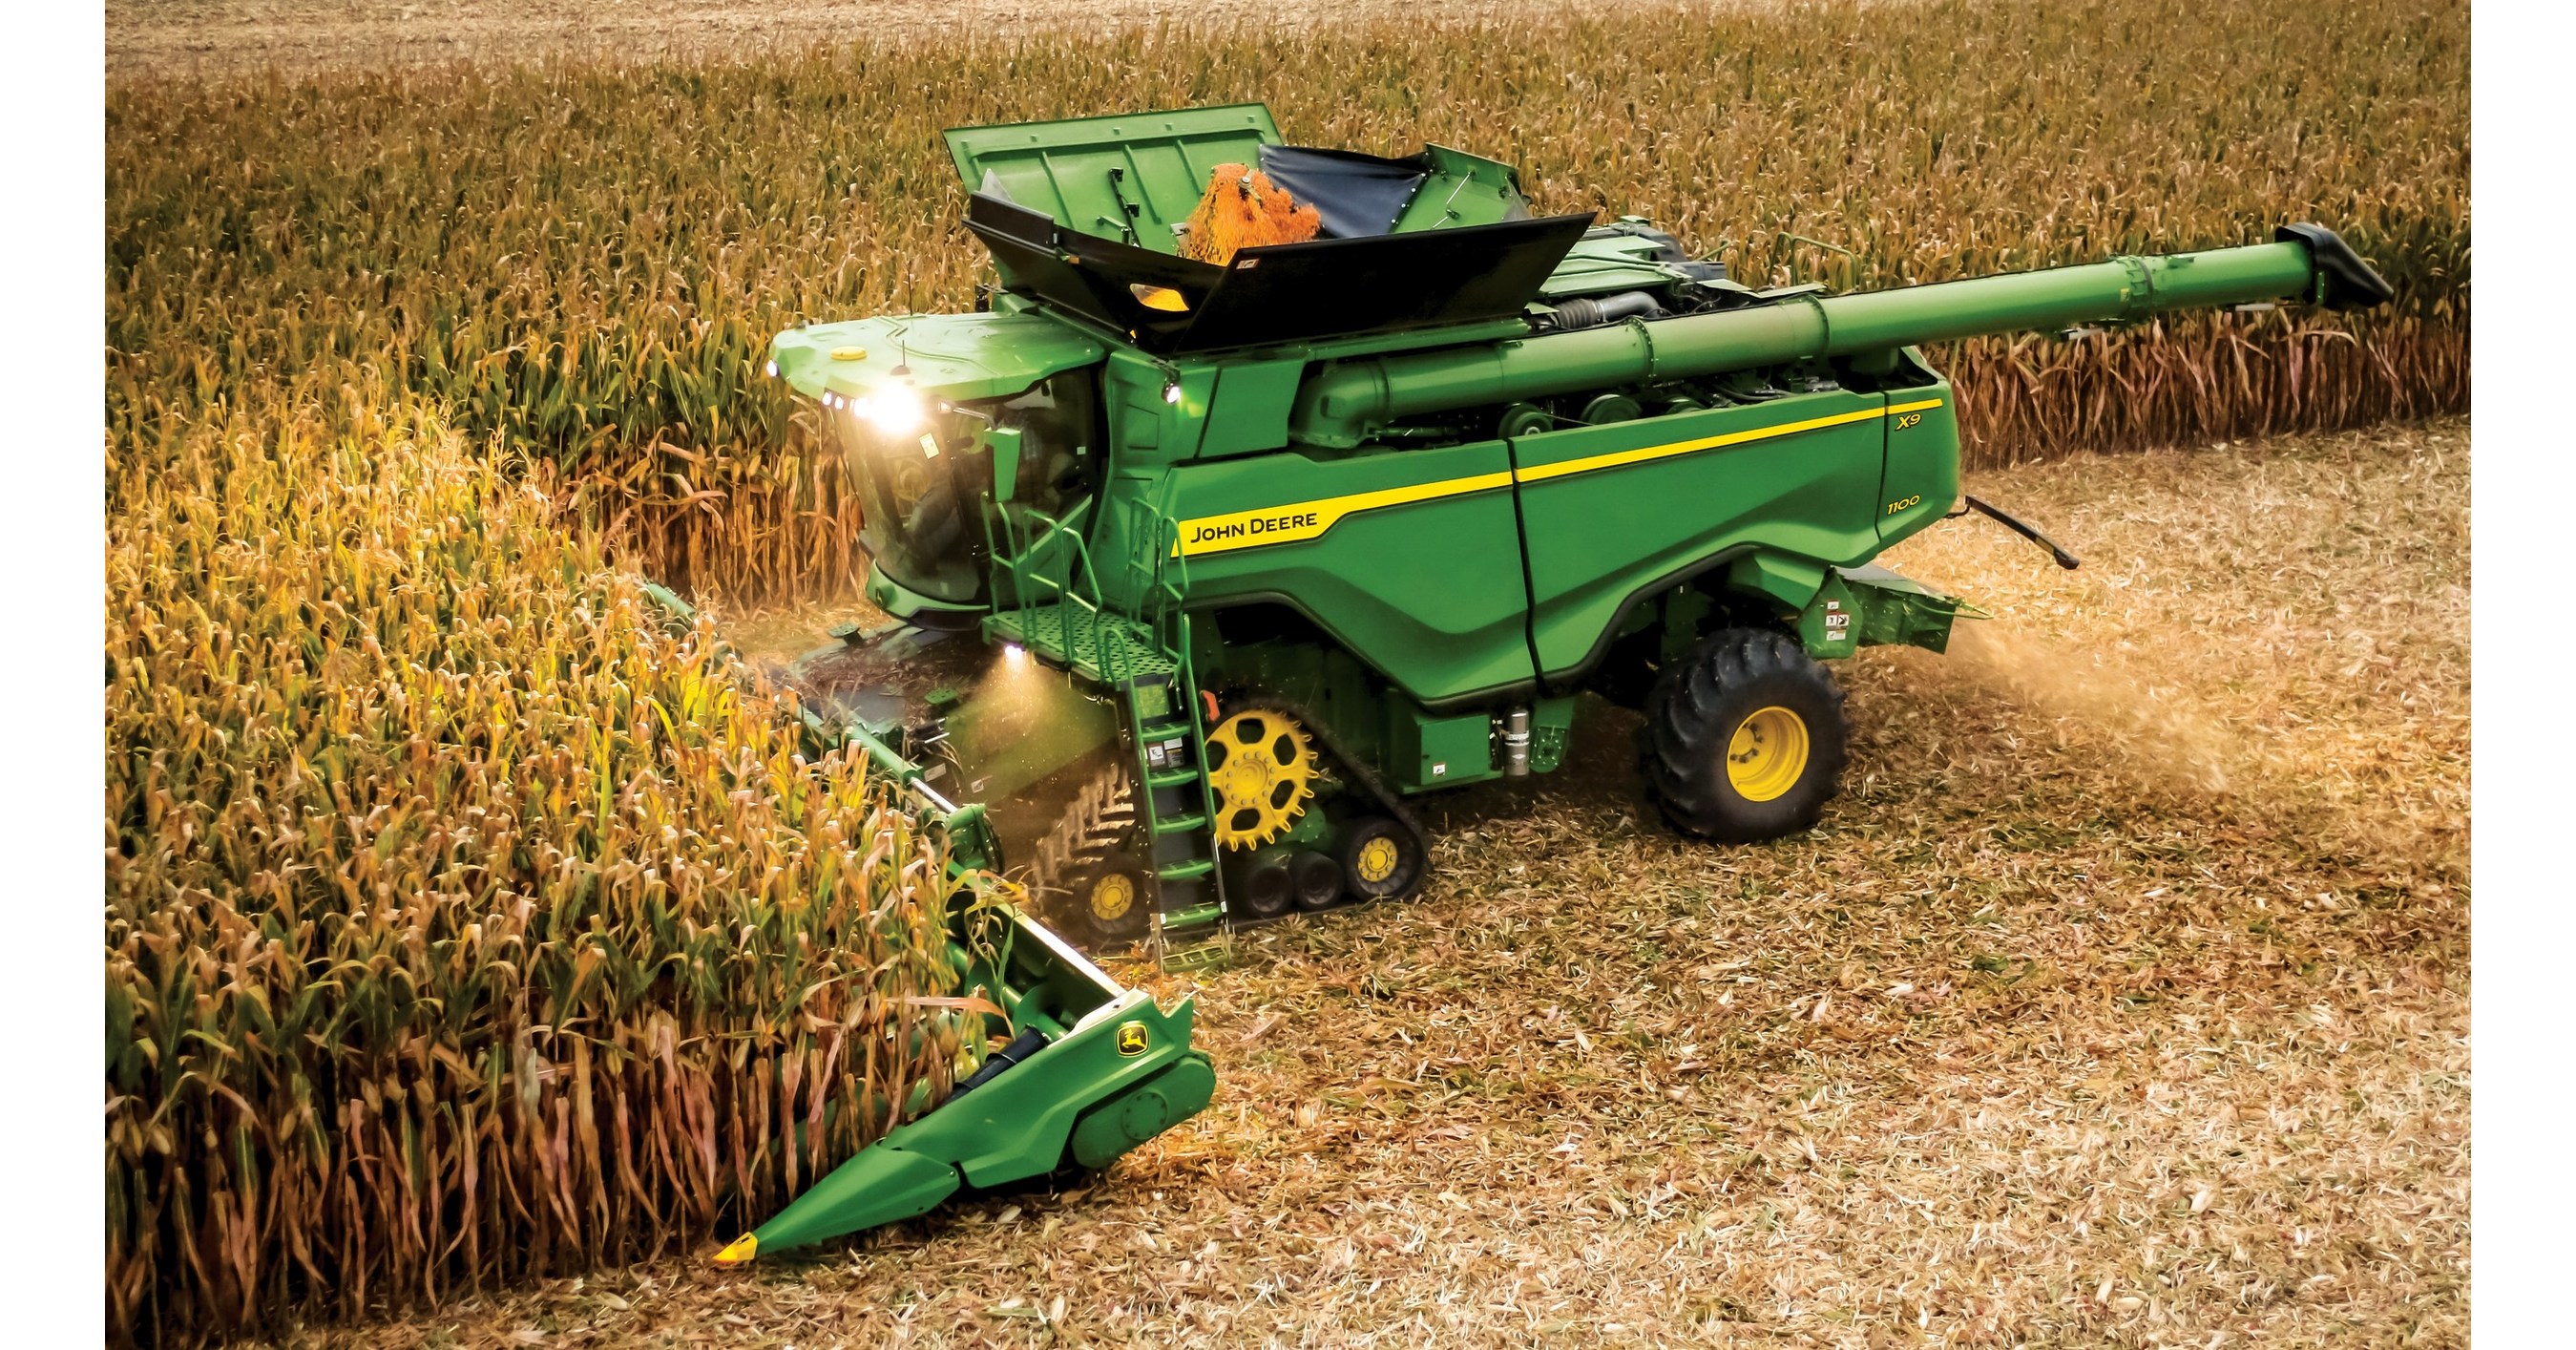 CES honors John Deere for X Series combines in Robotics category